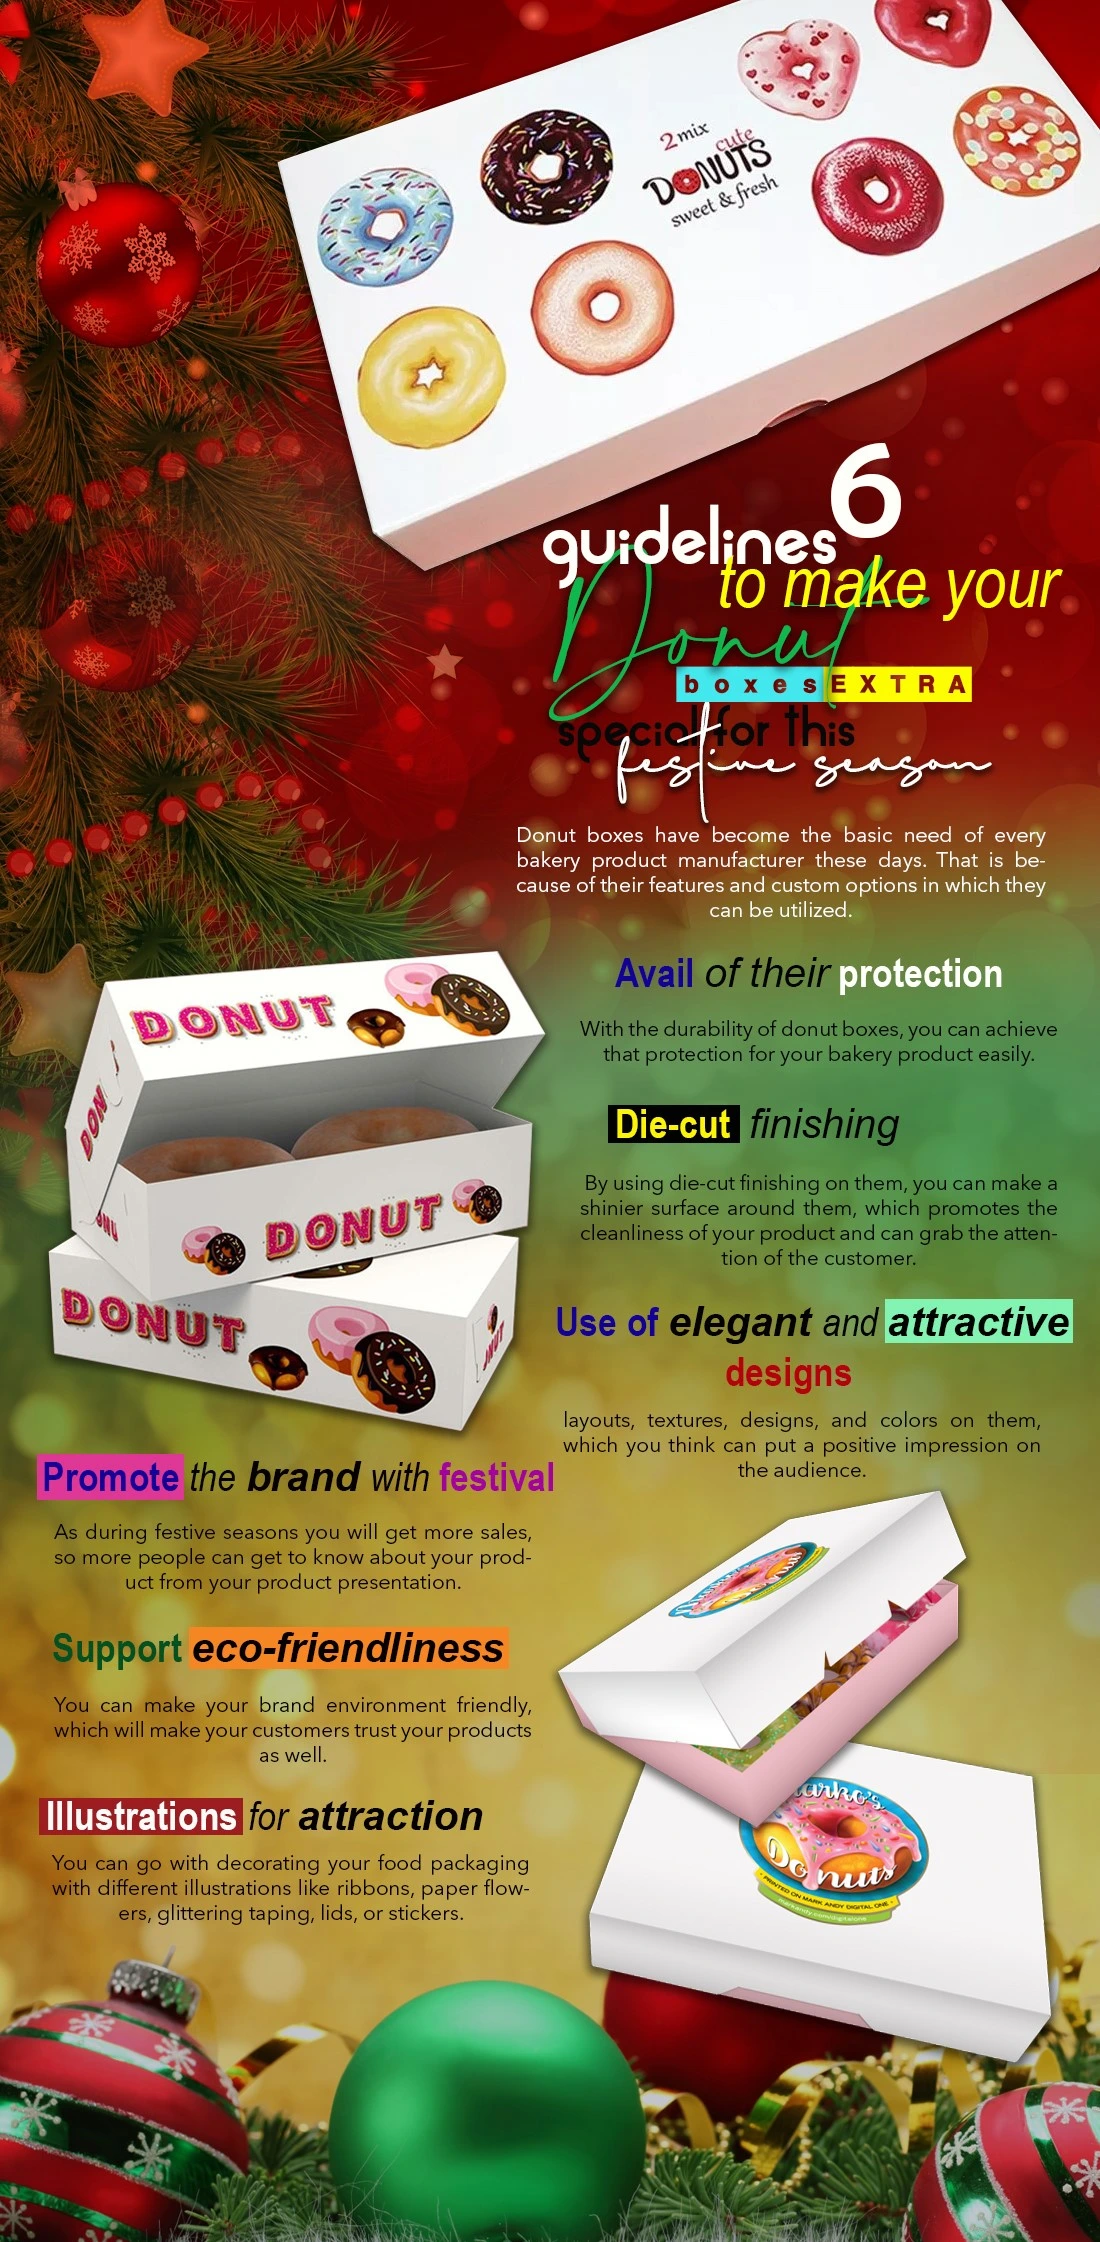 6 Guidelines To Make Your Donut Boxes Extra Special For This Festive Season